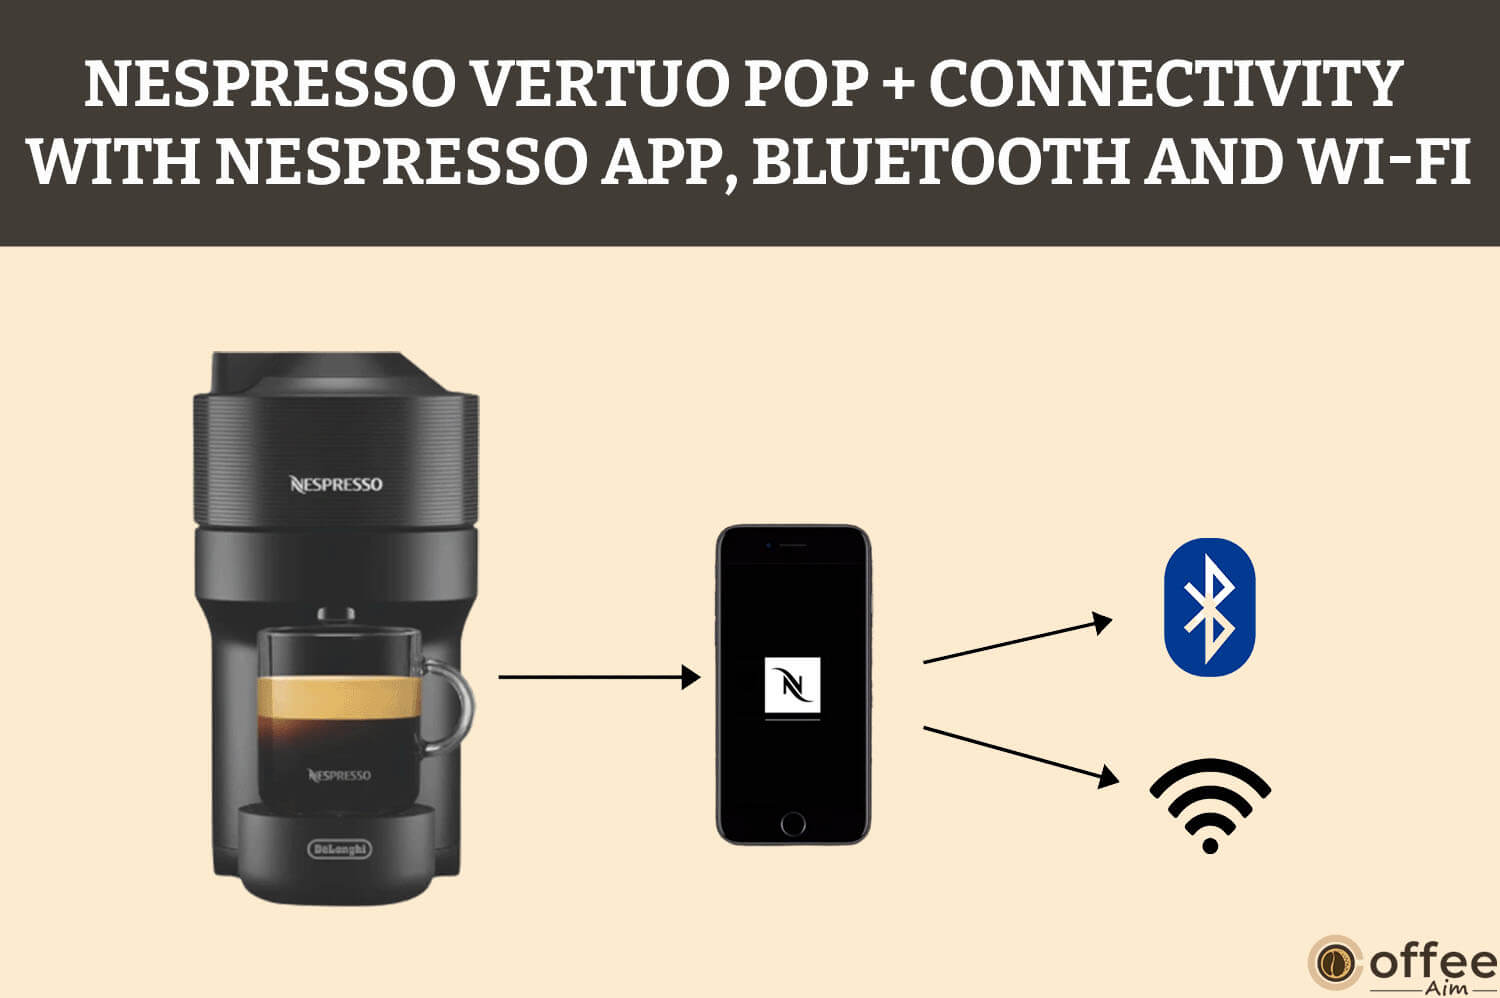 Featured image for the article "Nespresso Vertuo Pop +Connectivity with Nespresso App, BlueTooth and Wi-Fi"